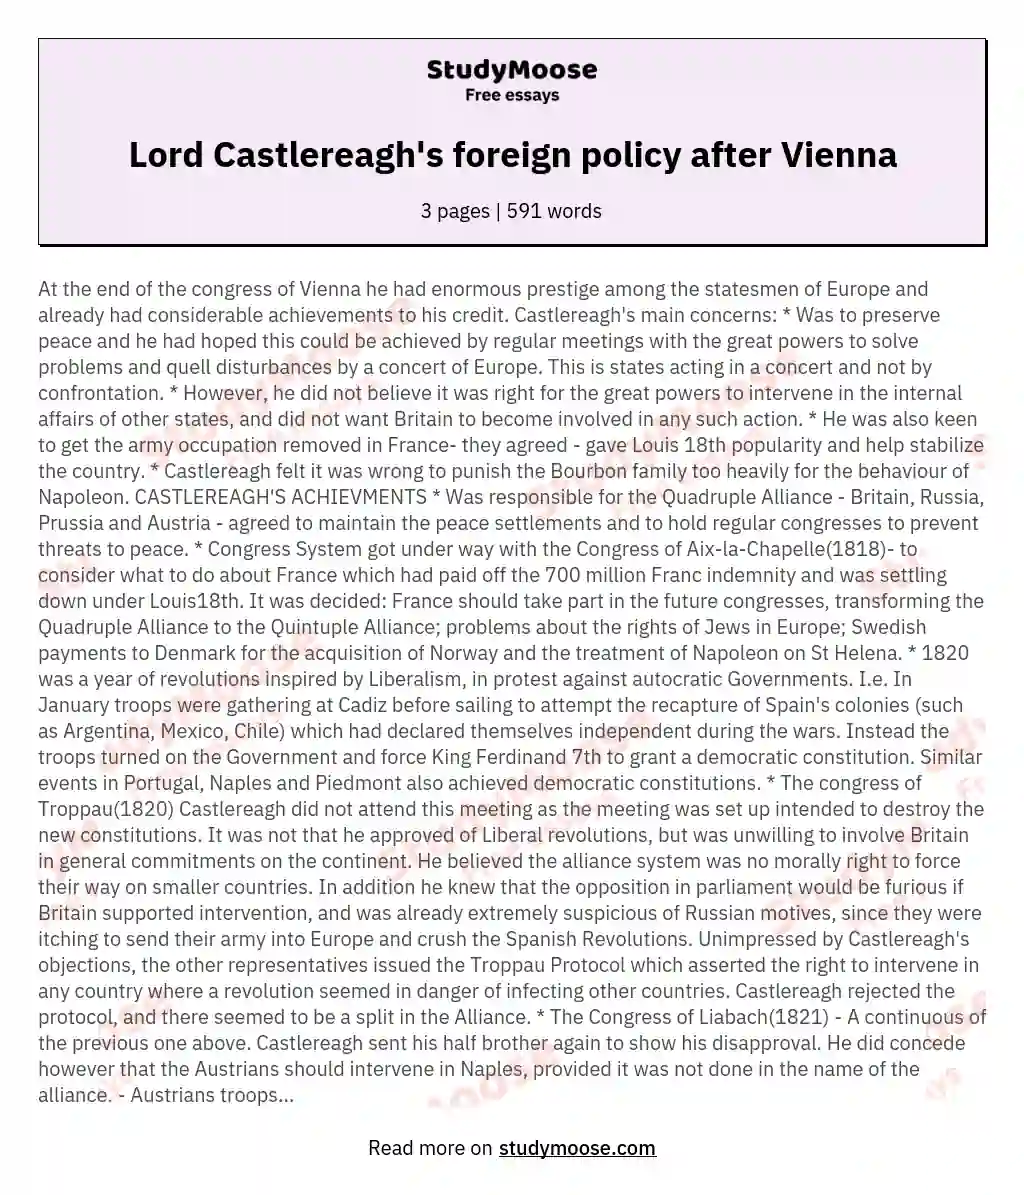 What were the aims and achievements of Lord Castlereagh in foreign affairs after the Congress of Vienna?